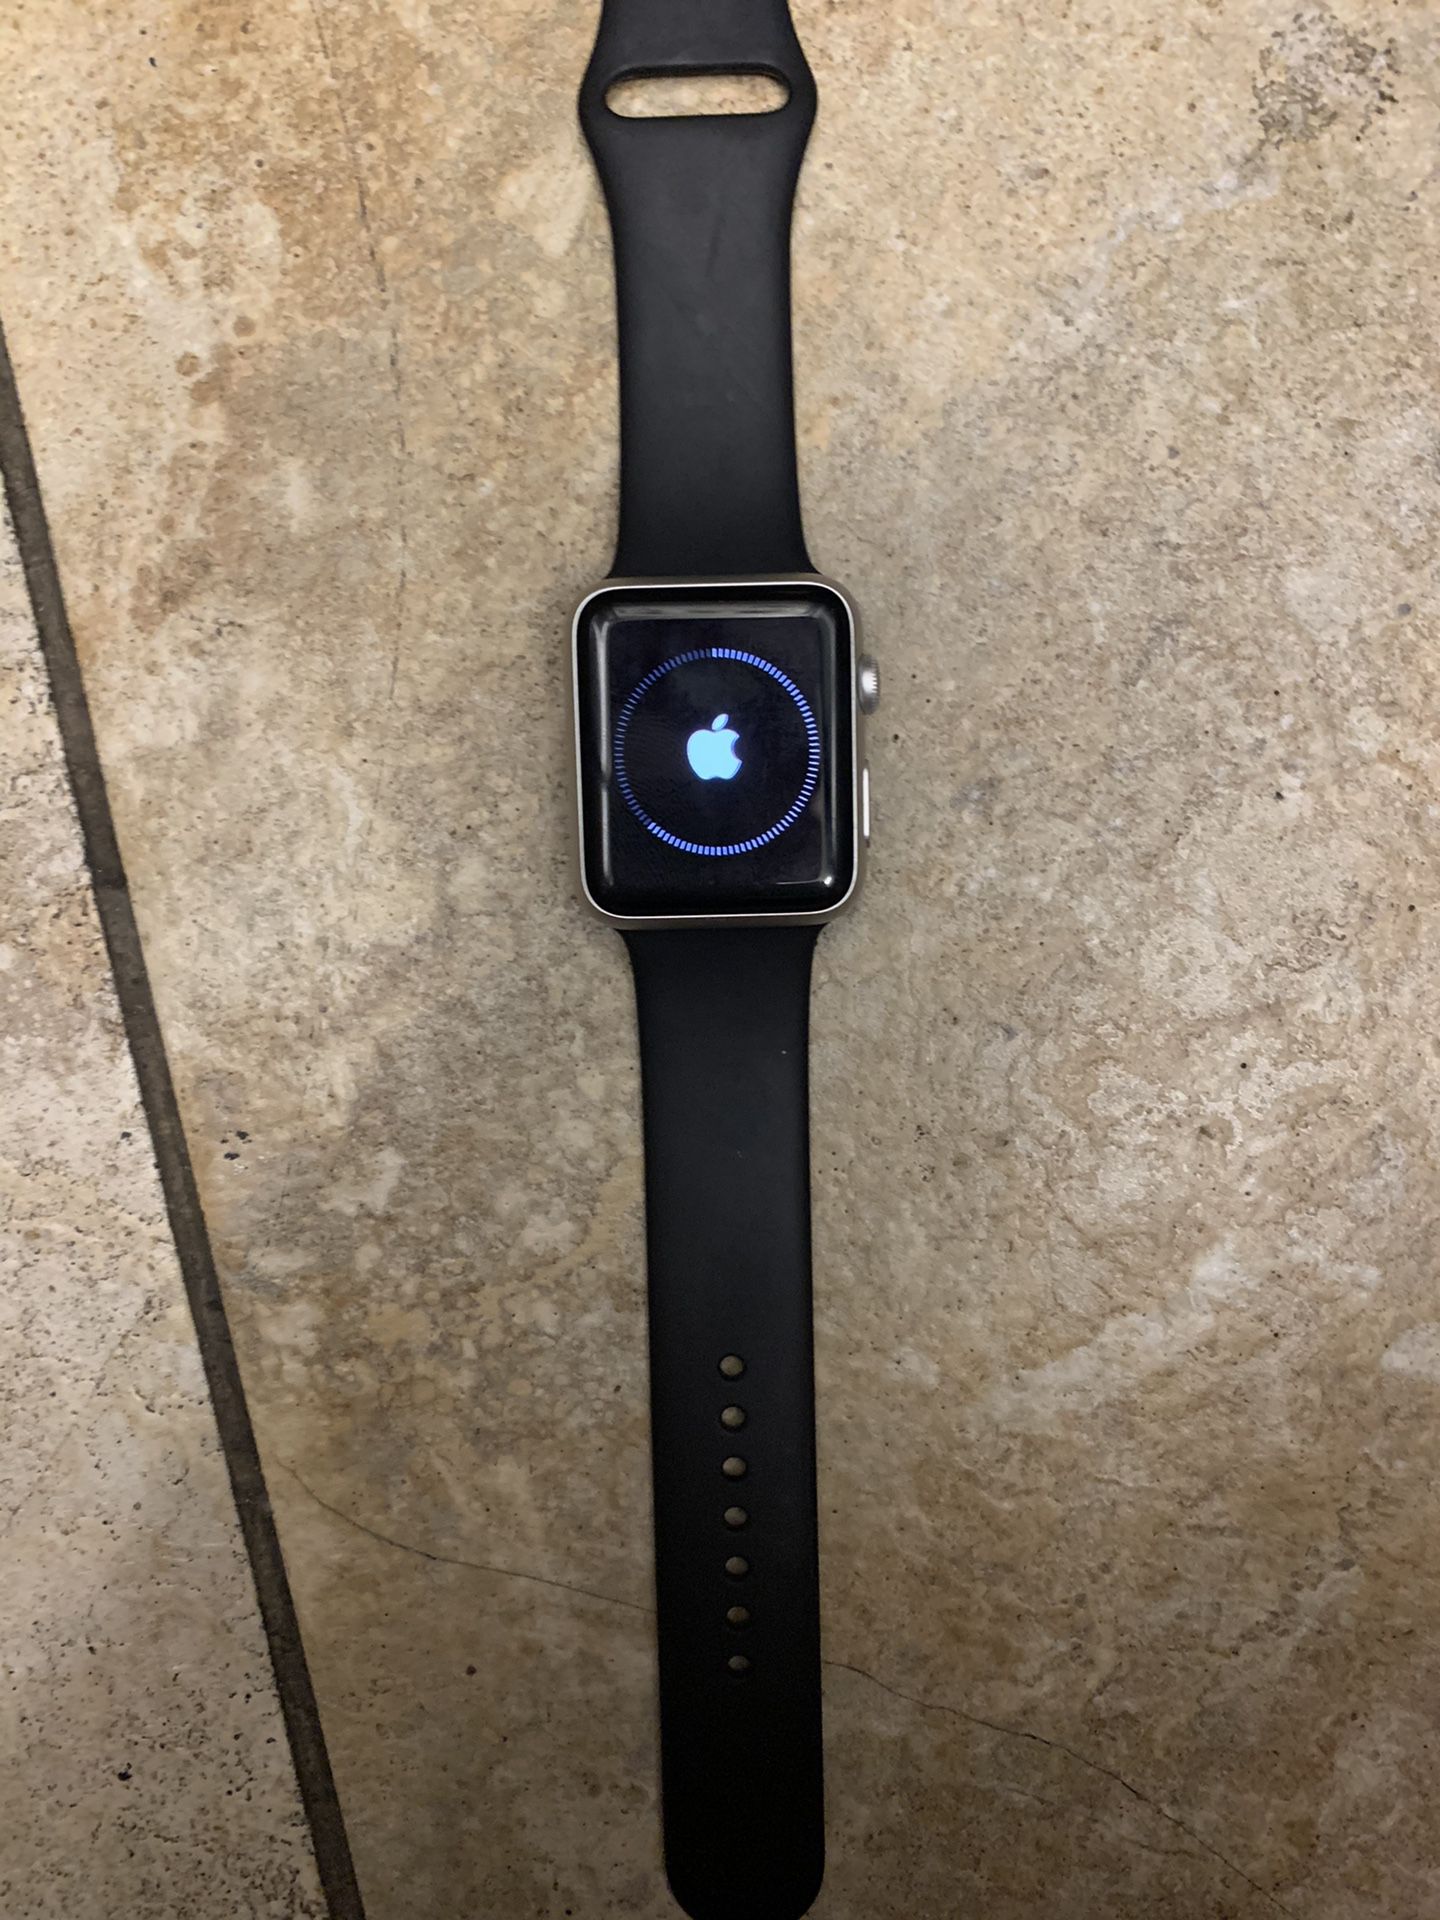 Apple Watch series 1 42mm silver - no charger